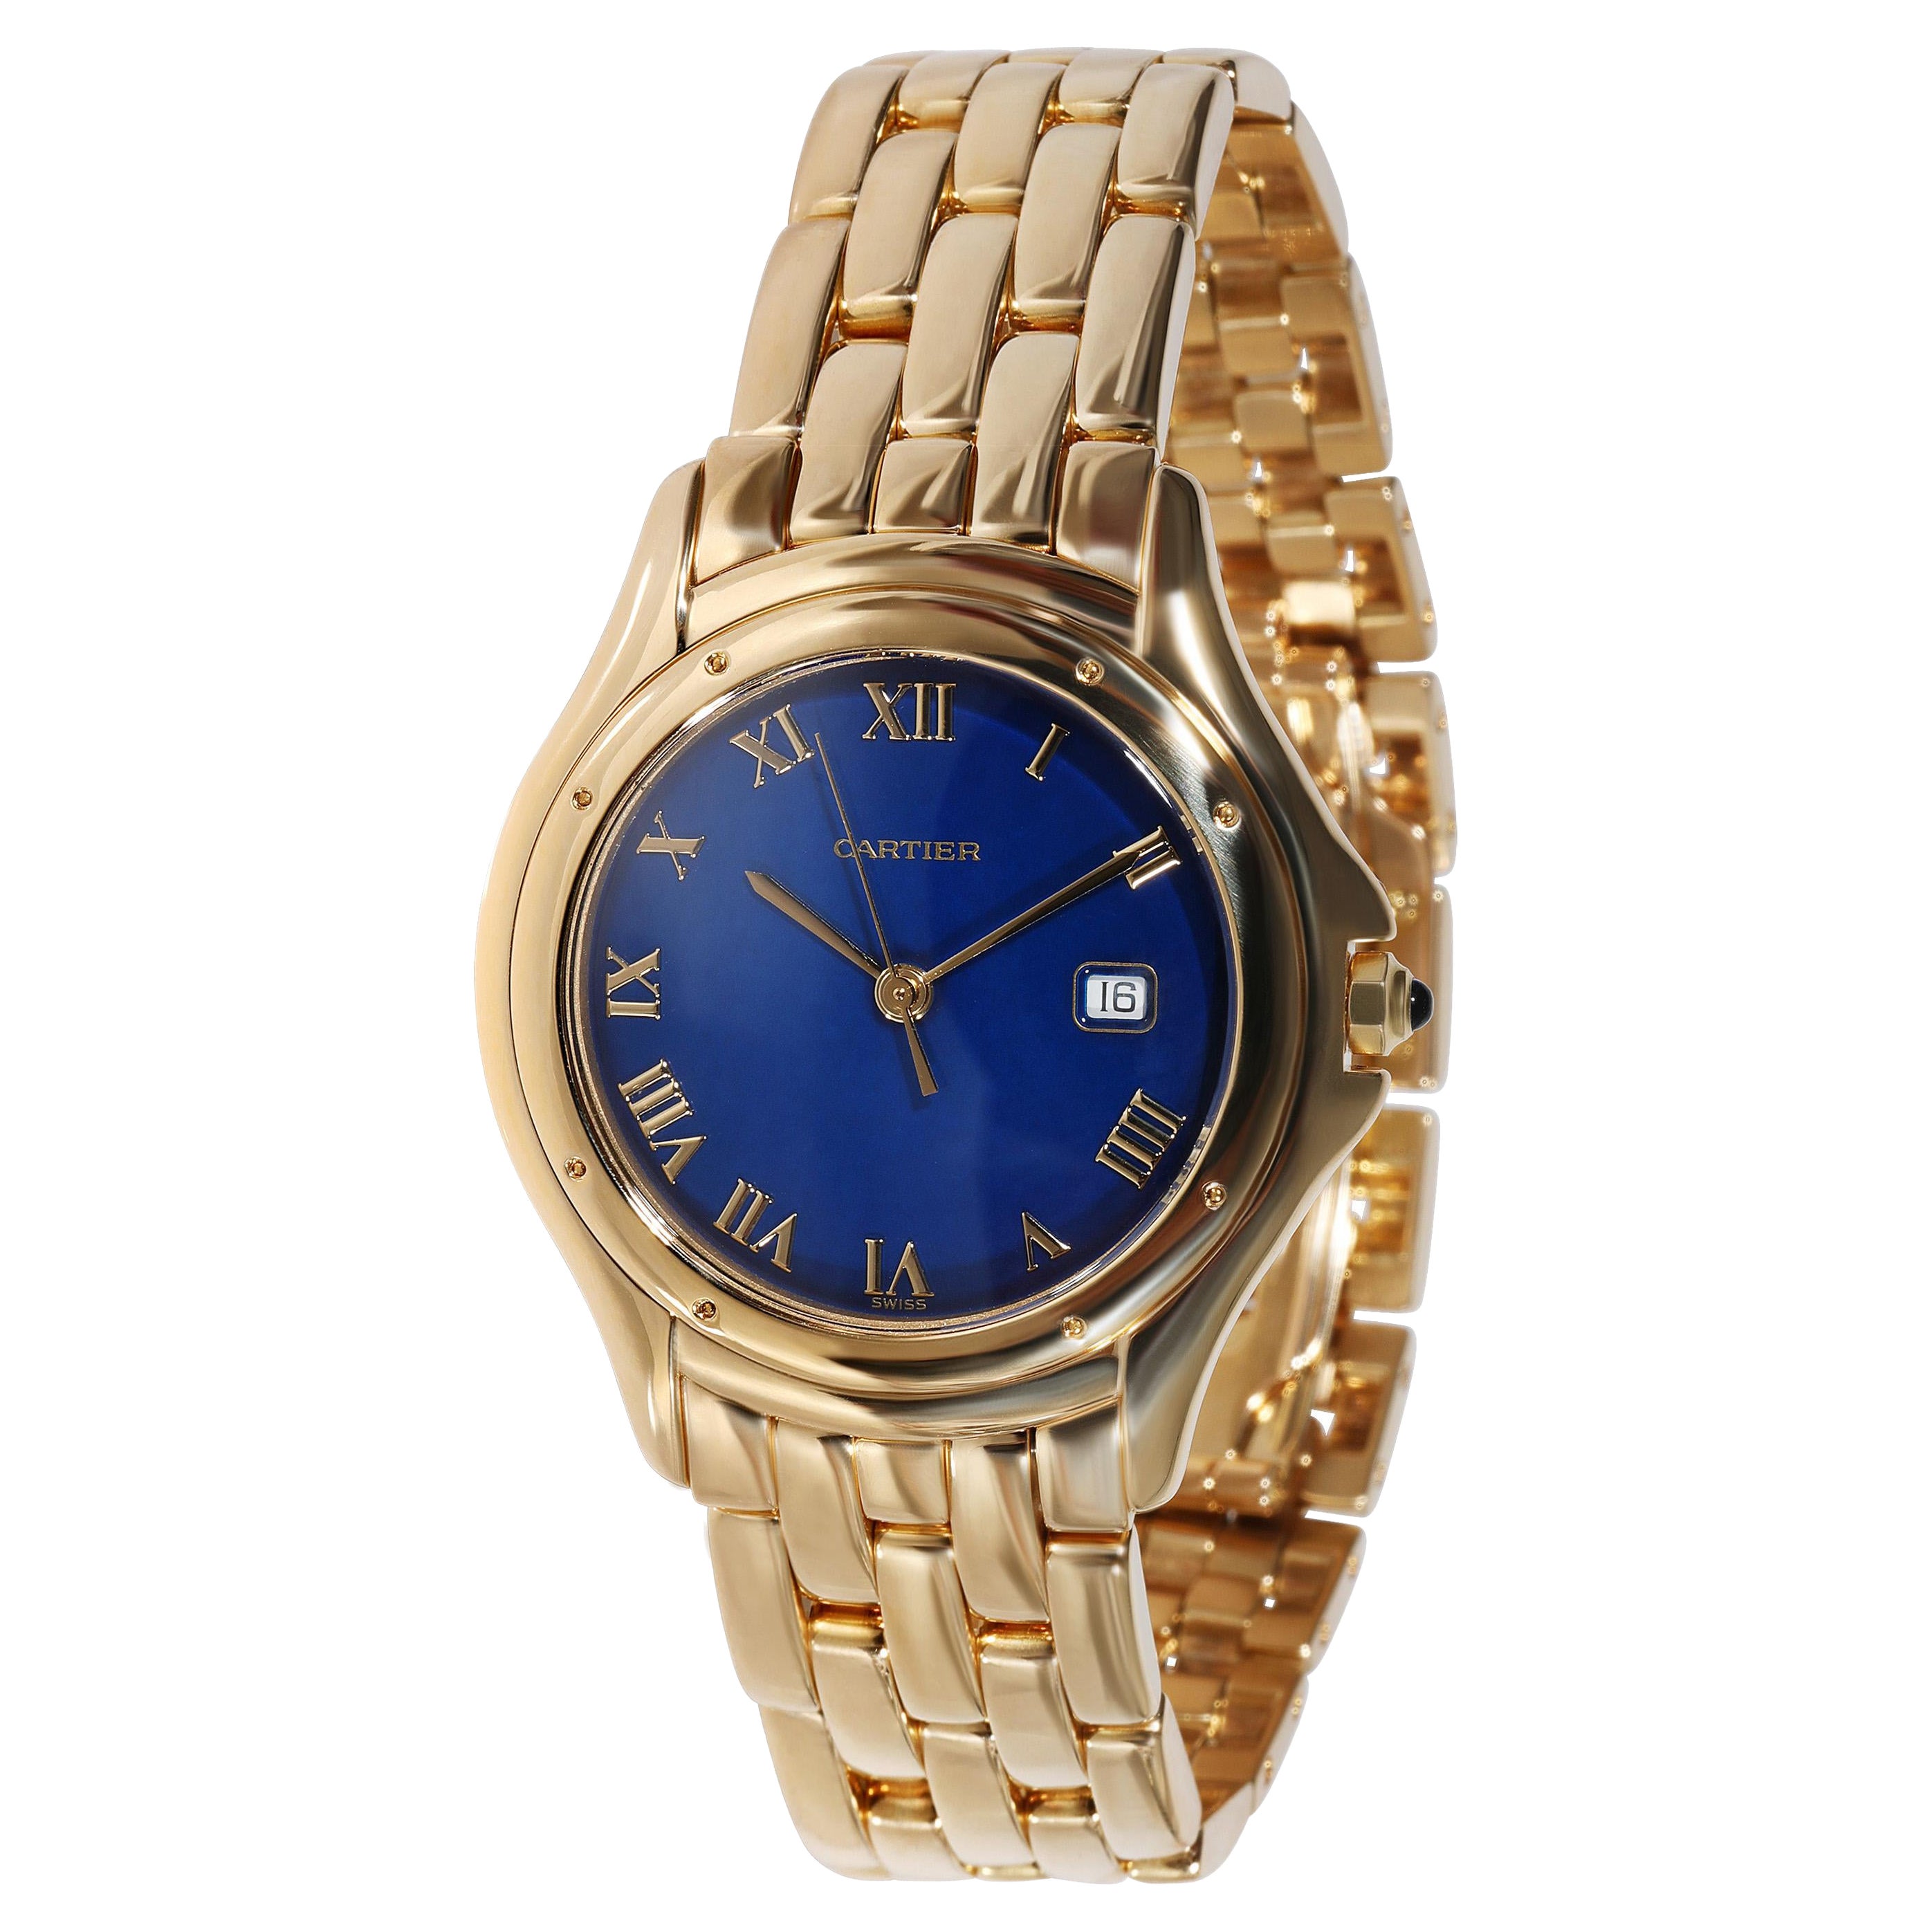 Cartier Cougar 887904 Unisex Watch in Yellow Gold